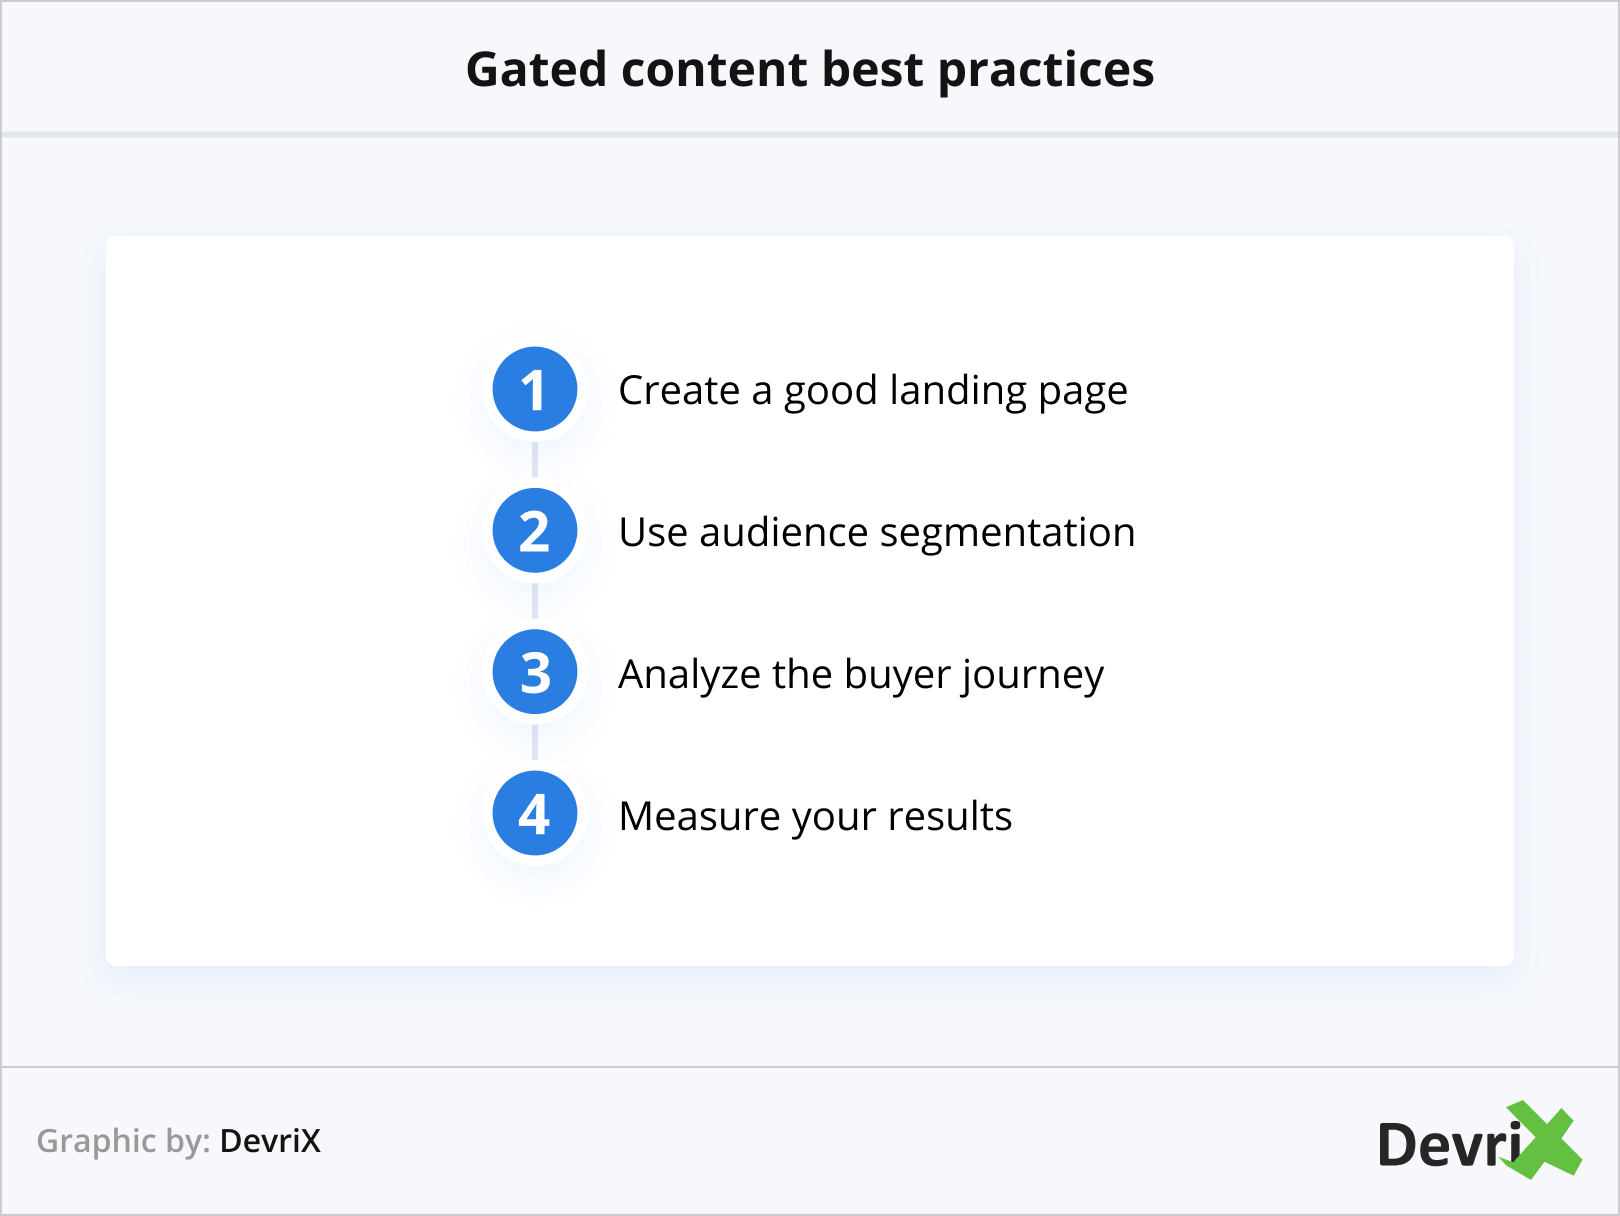 Gated content best practices